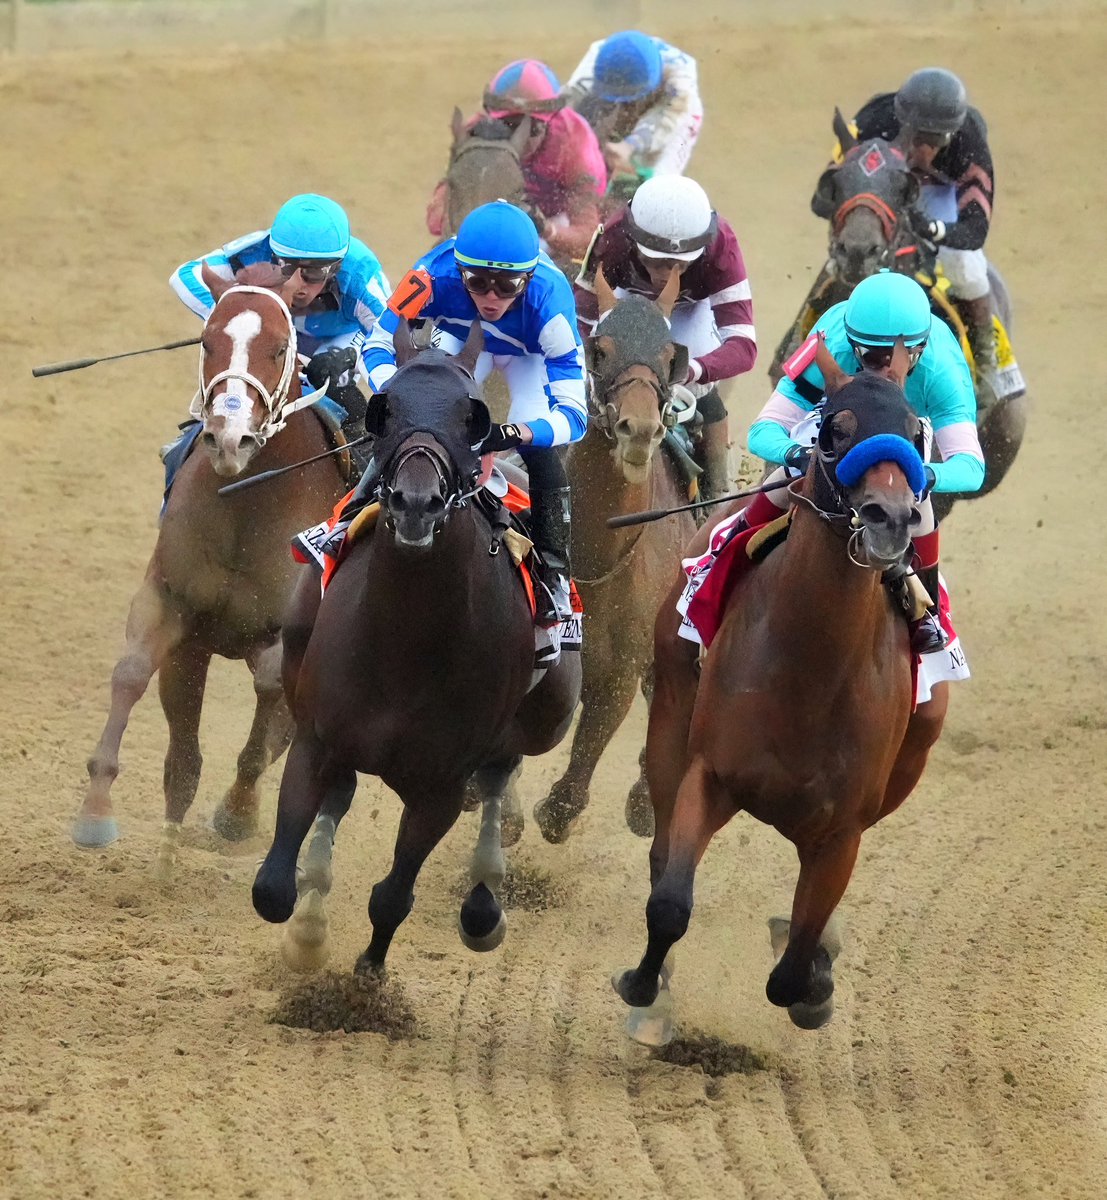 Now this is #Horse #Power All 7 @PreaknessStakes contenders rounding turn 4 #NationalTreasure for the #win @ChevyTrucks #DodgeTrucks you got nothin on these #Horses Photo: @jeffreypix